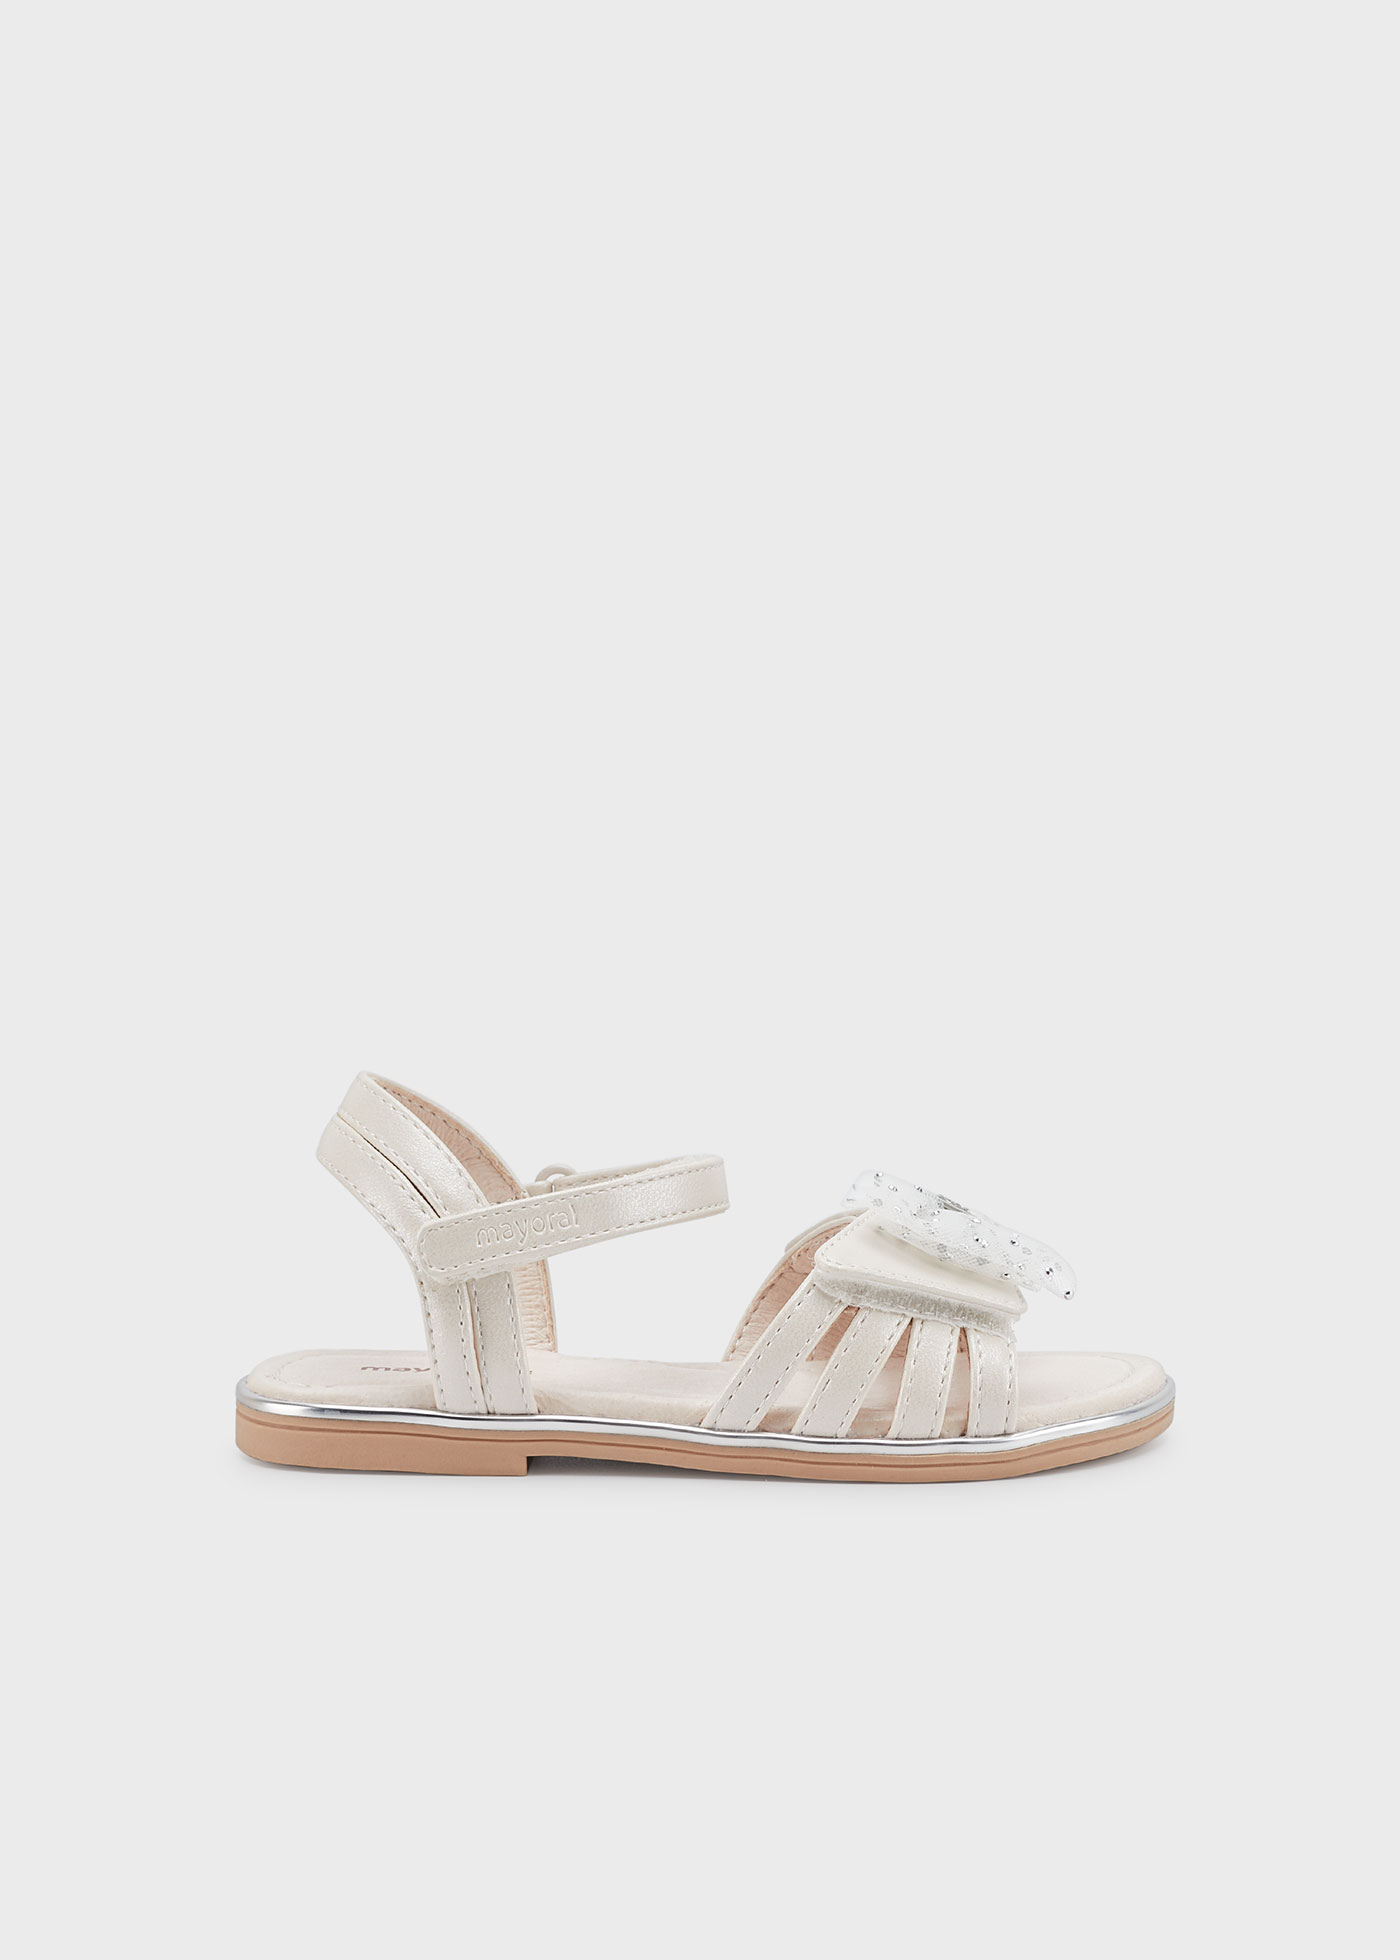 Girls sandals sustainable leather